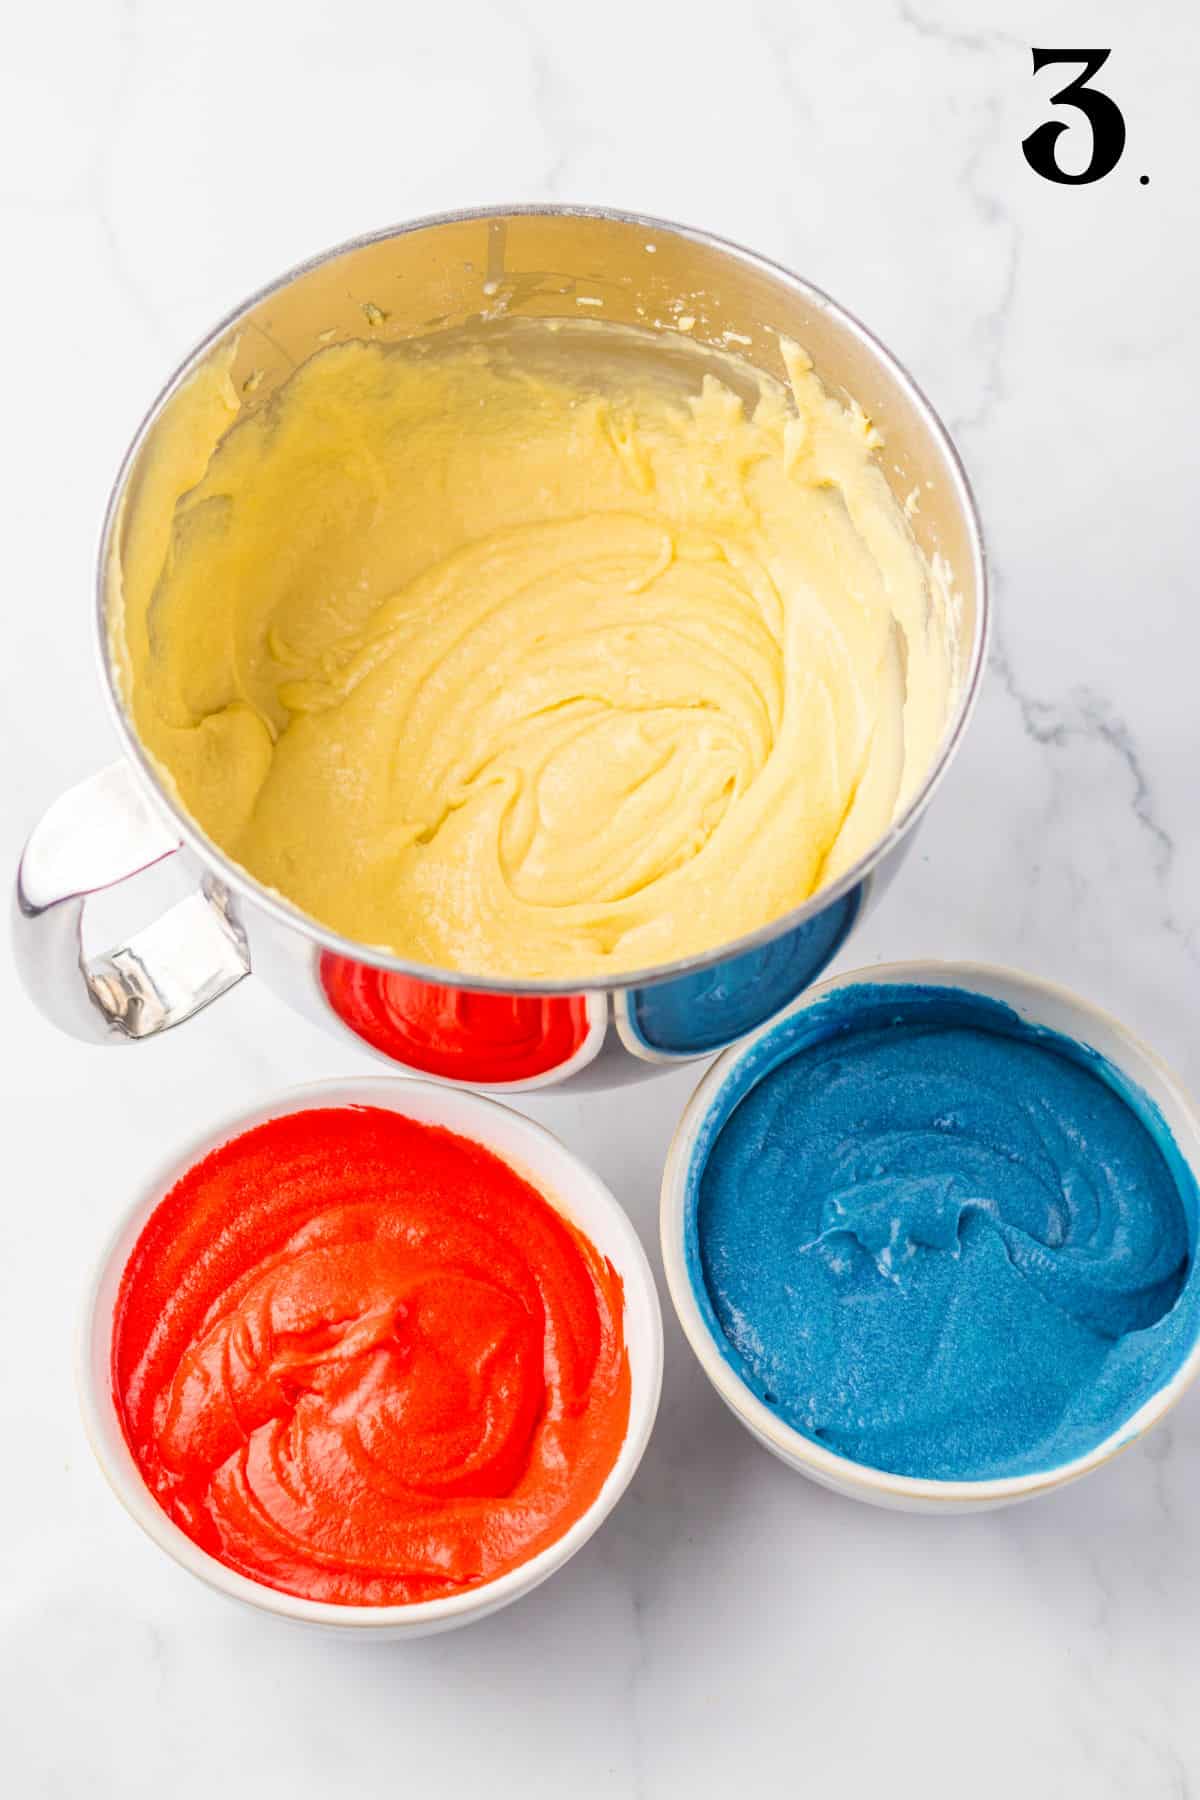 How to Make a 4th of July Bundt Cake - Step 3